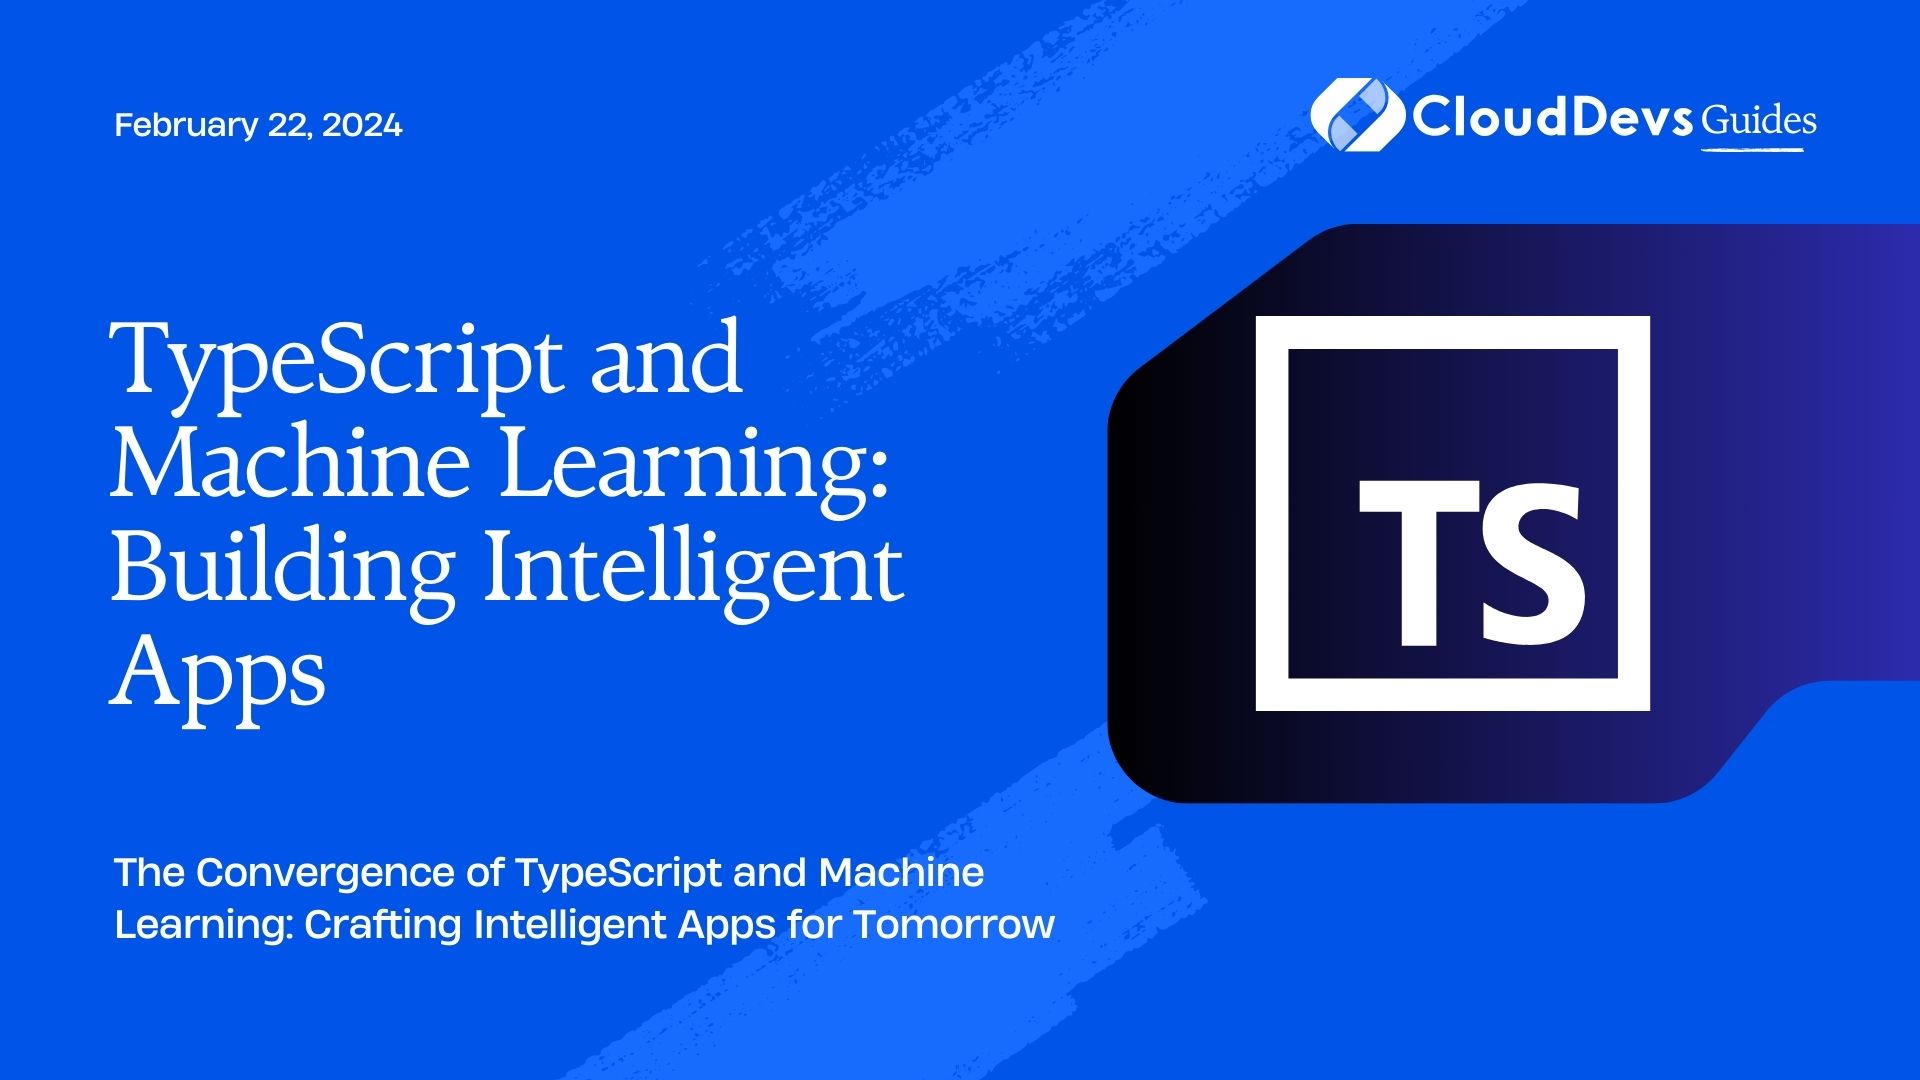 TypeScript and Machine Learning: Building Intelligent Apps